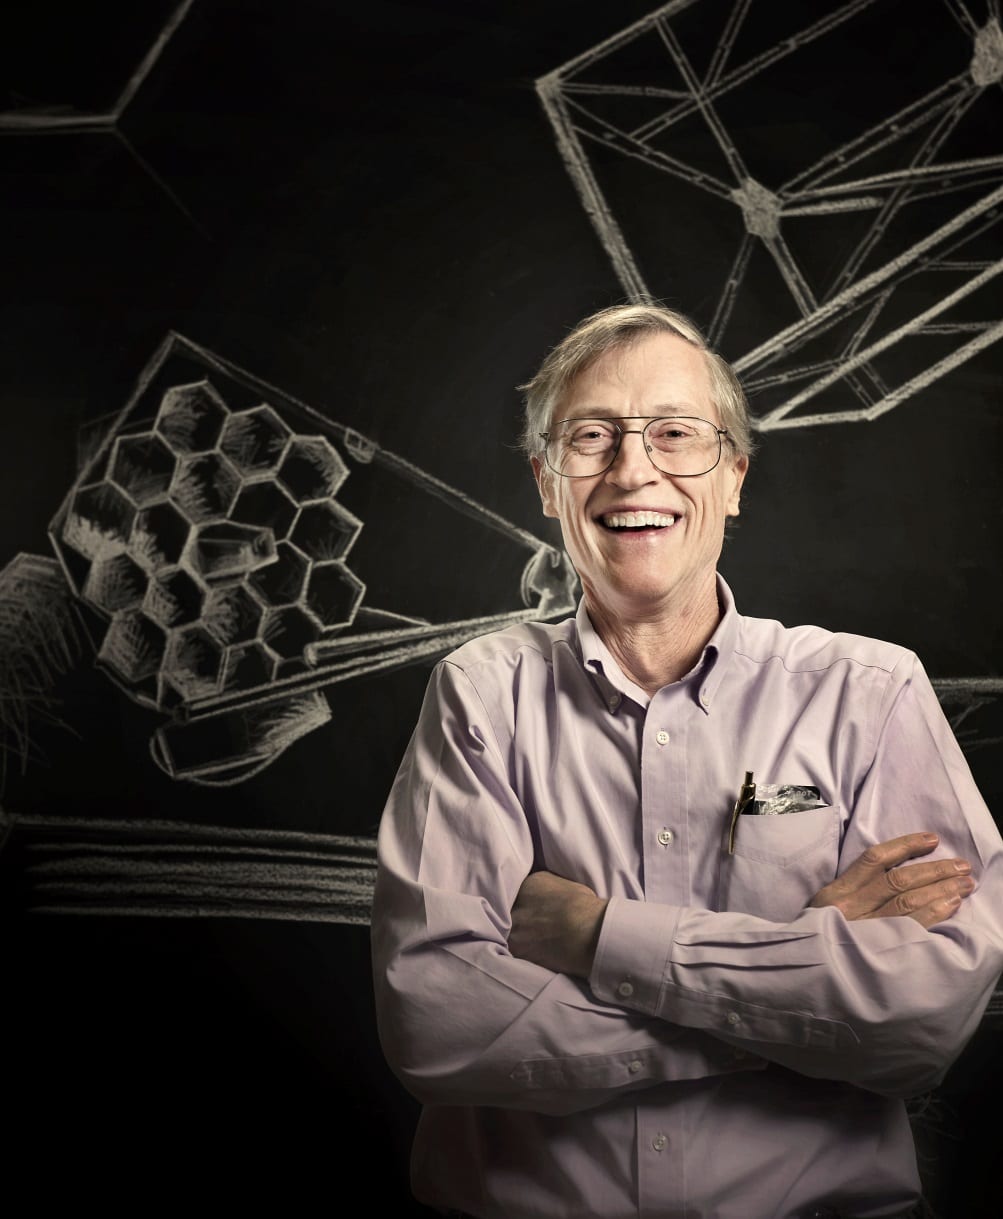 John Mather is excited about the release of the upcoming James Webb Space Telescope, sketched behind him, and how future discoveries in cosmology might benefit science as a whole. Image Credit: Chris Gunn